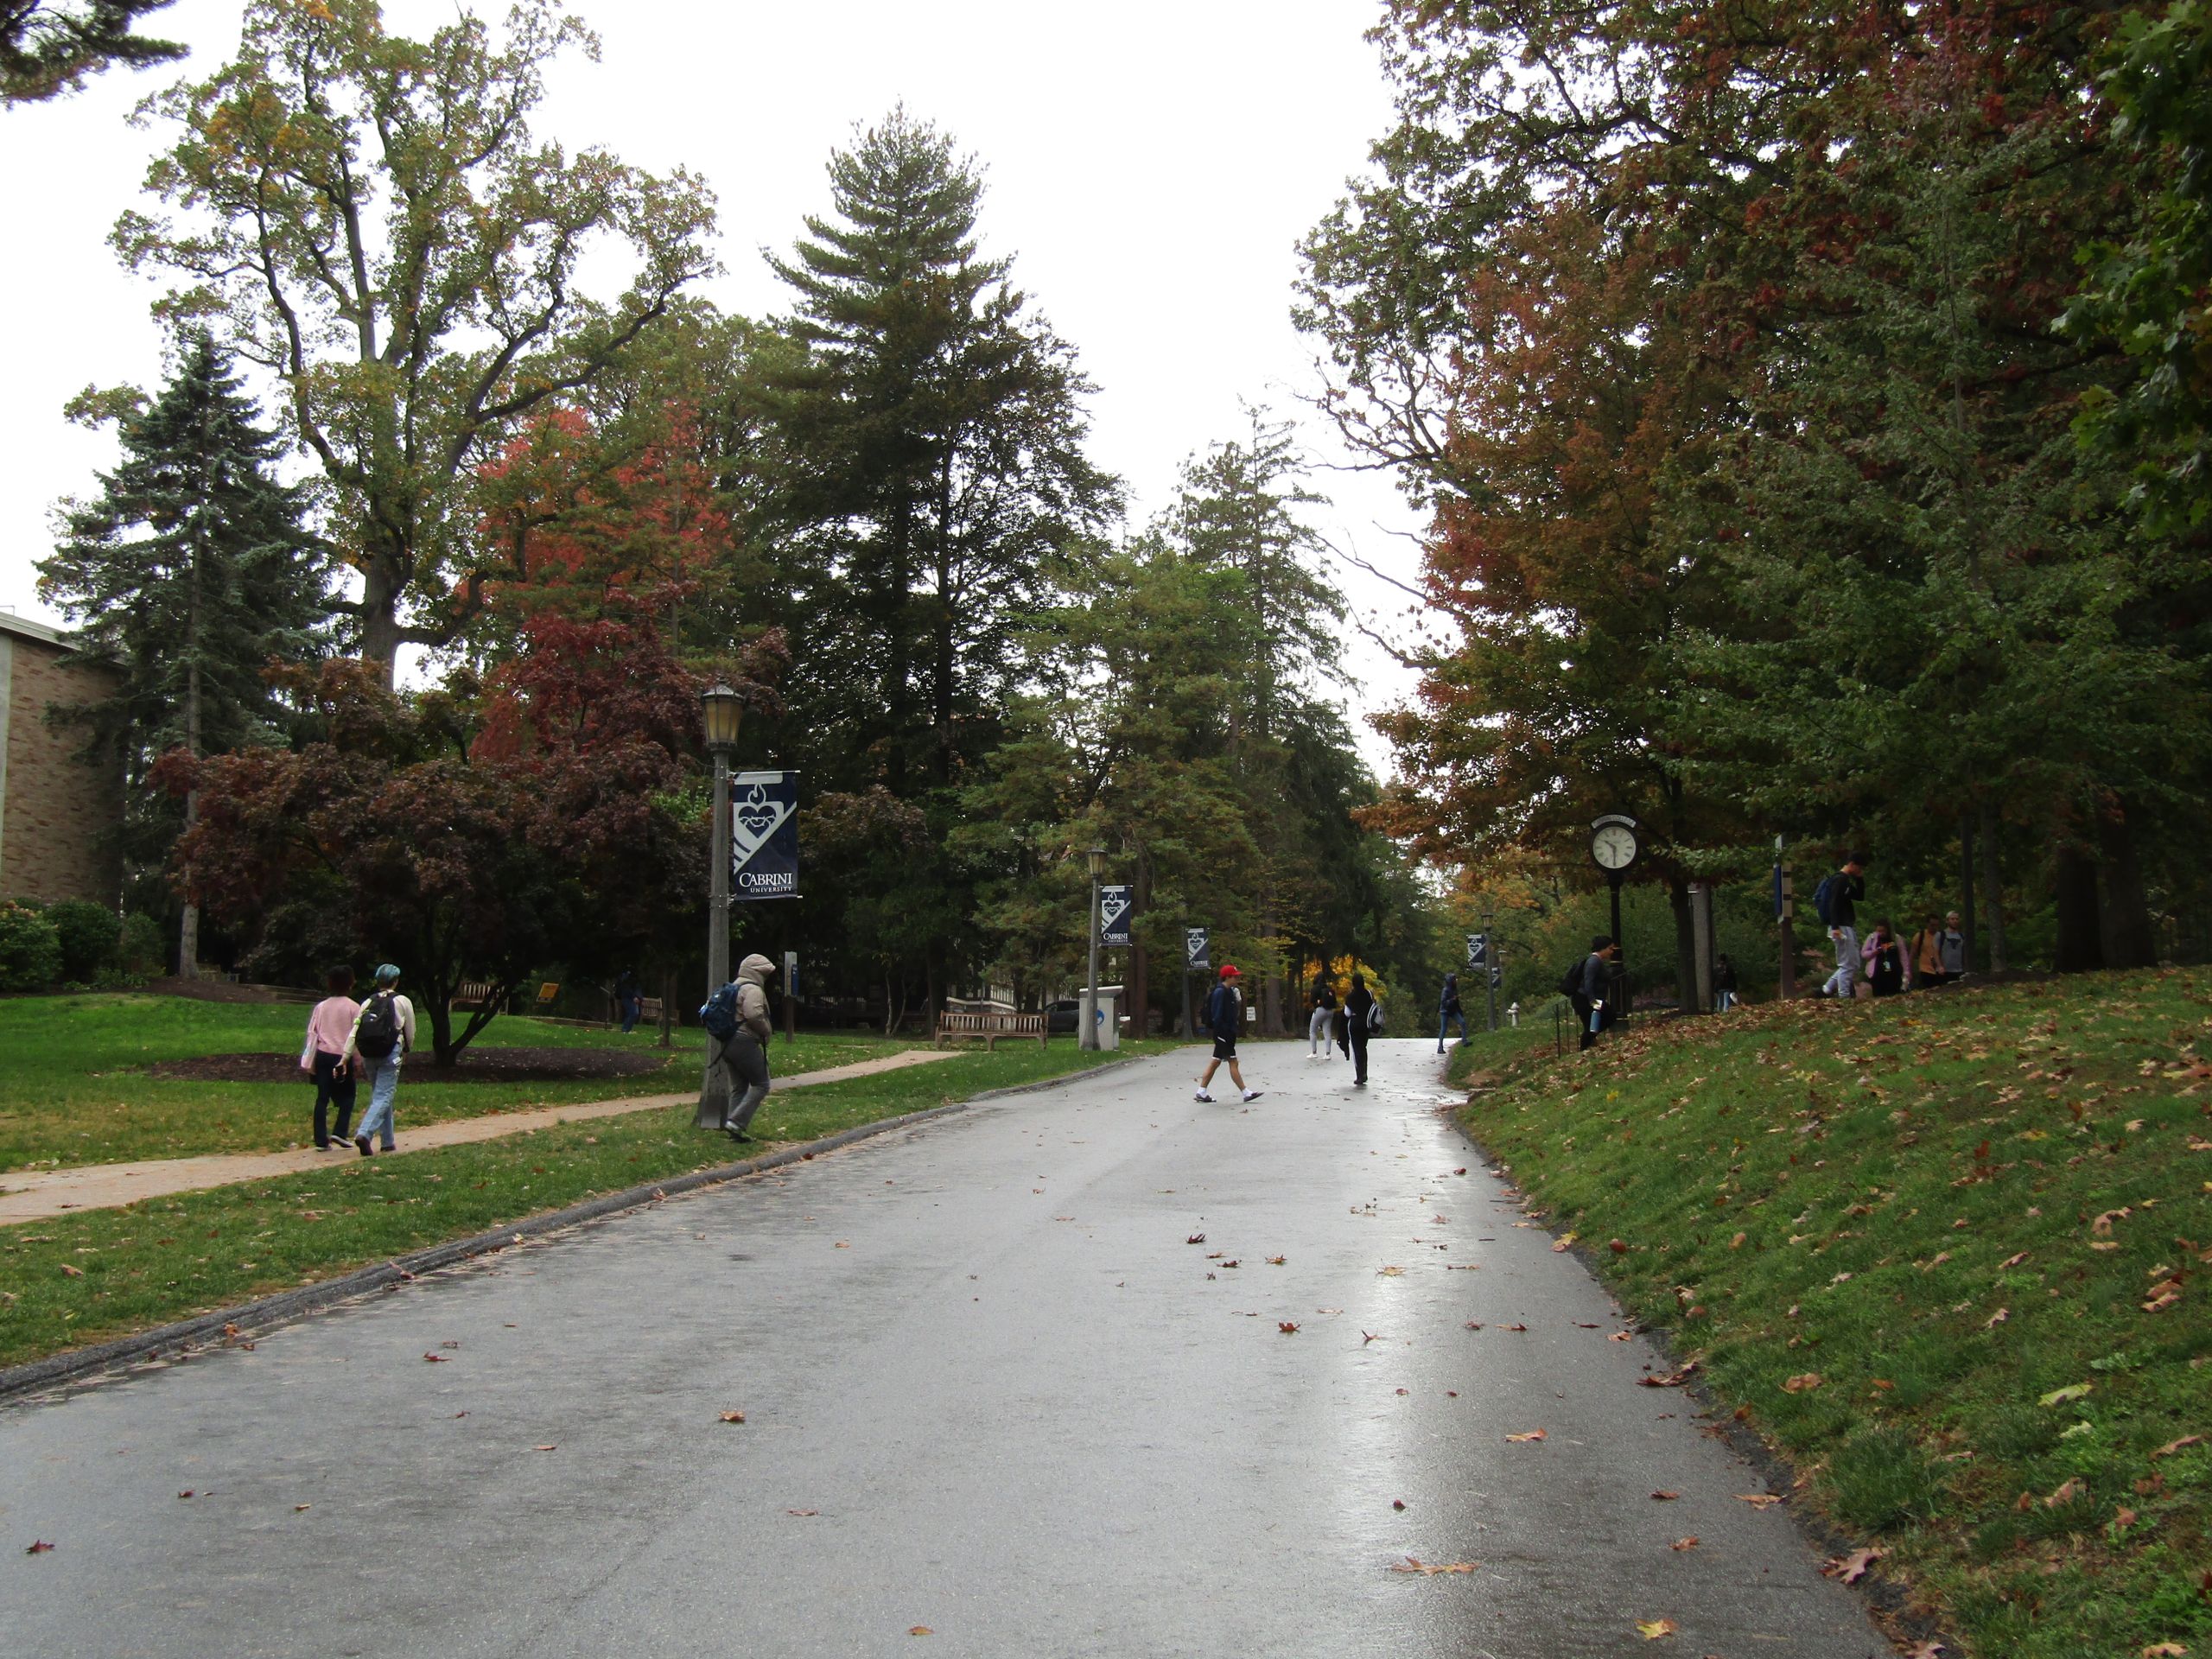 Students walking to classes. Photo by Victoria Giordano.